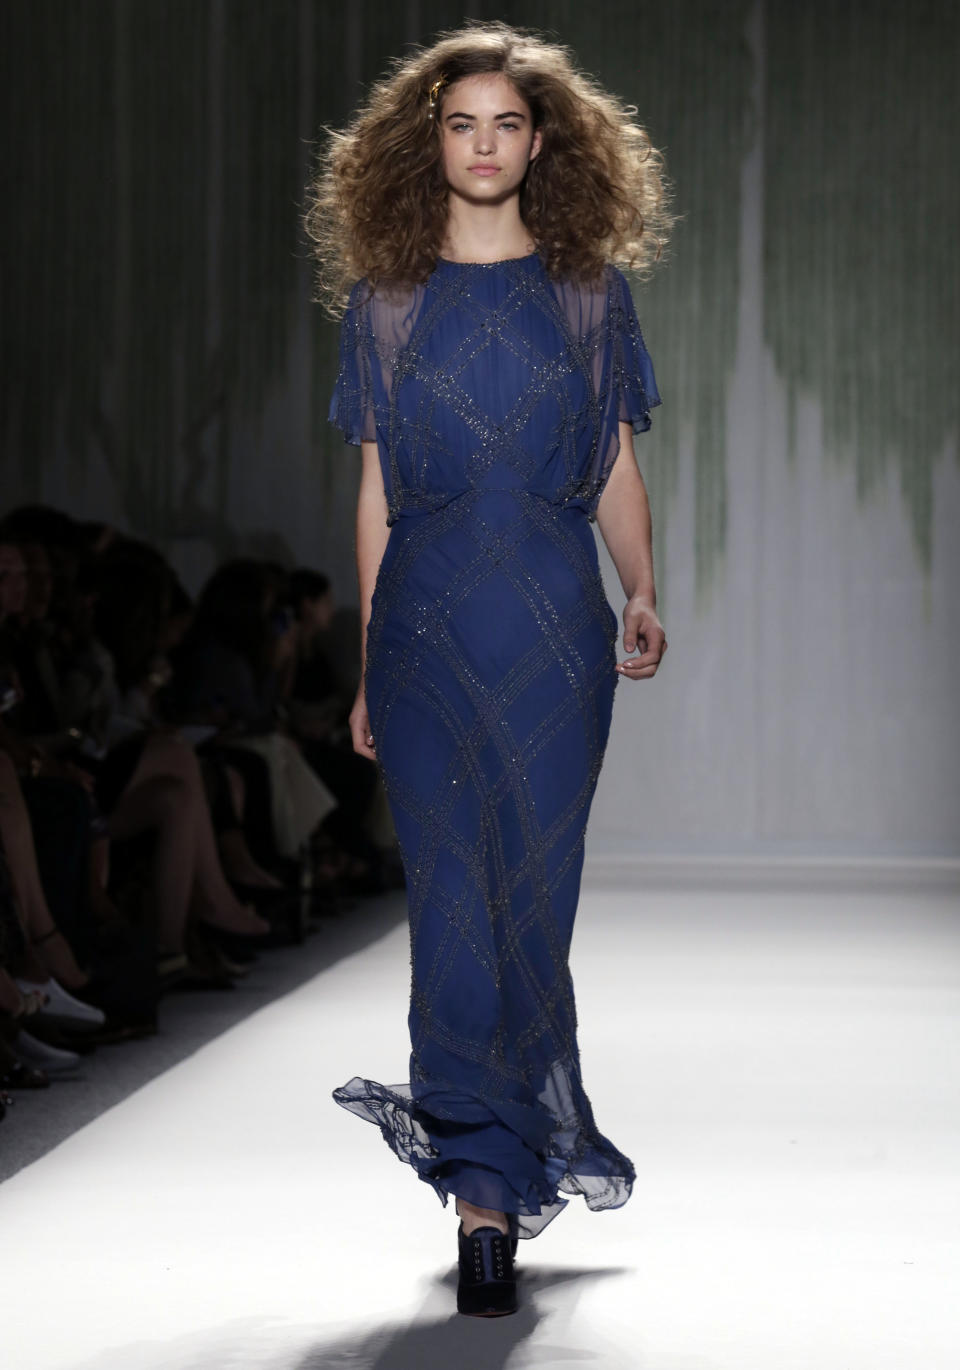 The Jenny Packham Spring 2014 collection is modeled during Fashion Week in New York, Tuesday, Sept. 10, 2013. (AP Photo/Richard Drew)